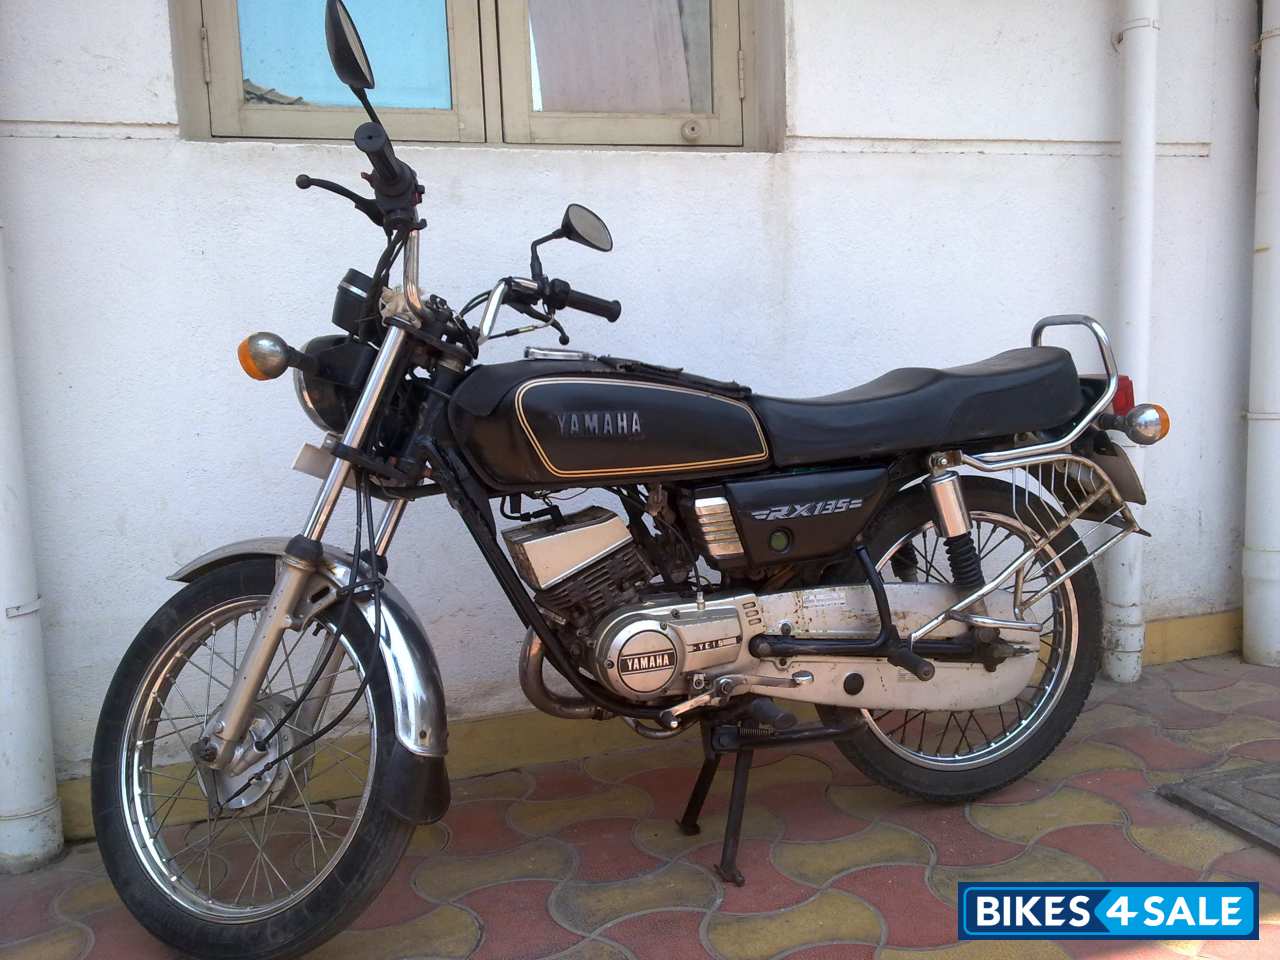 Used 2004 model Yamaha RX 135 for sale in Chennai. ID ...